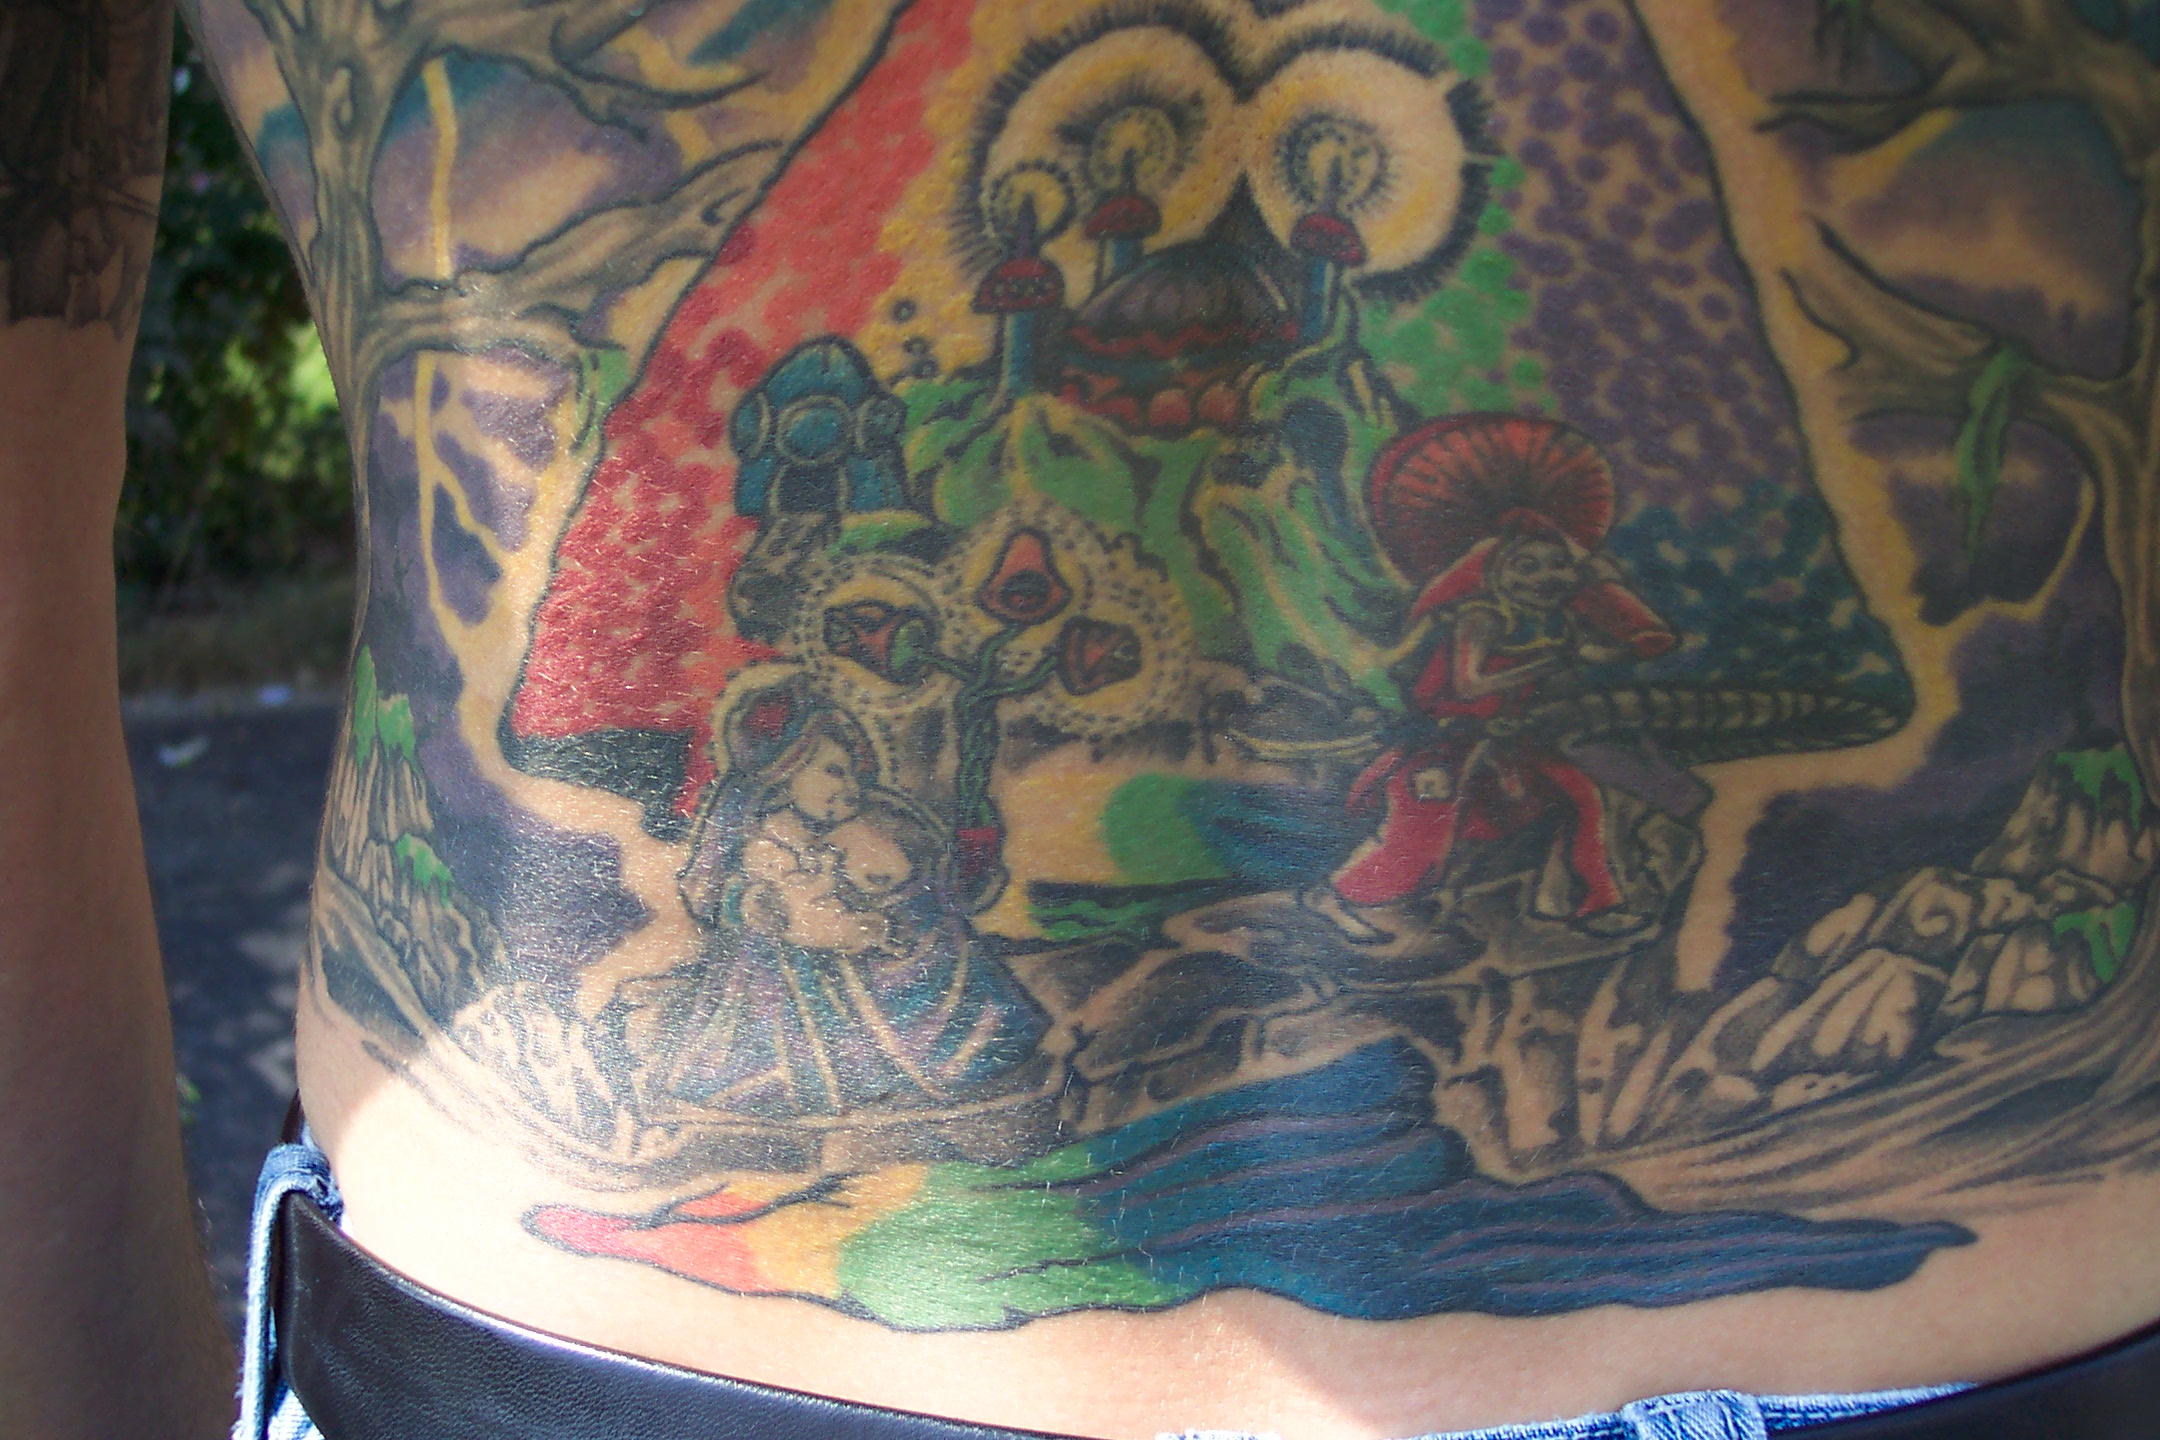 This tattoo covers most of my back.  It is my way of paying tribute to my favorite band.